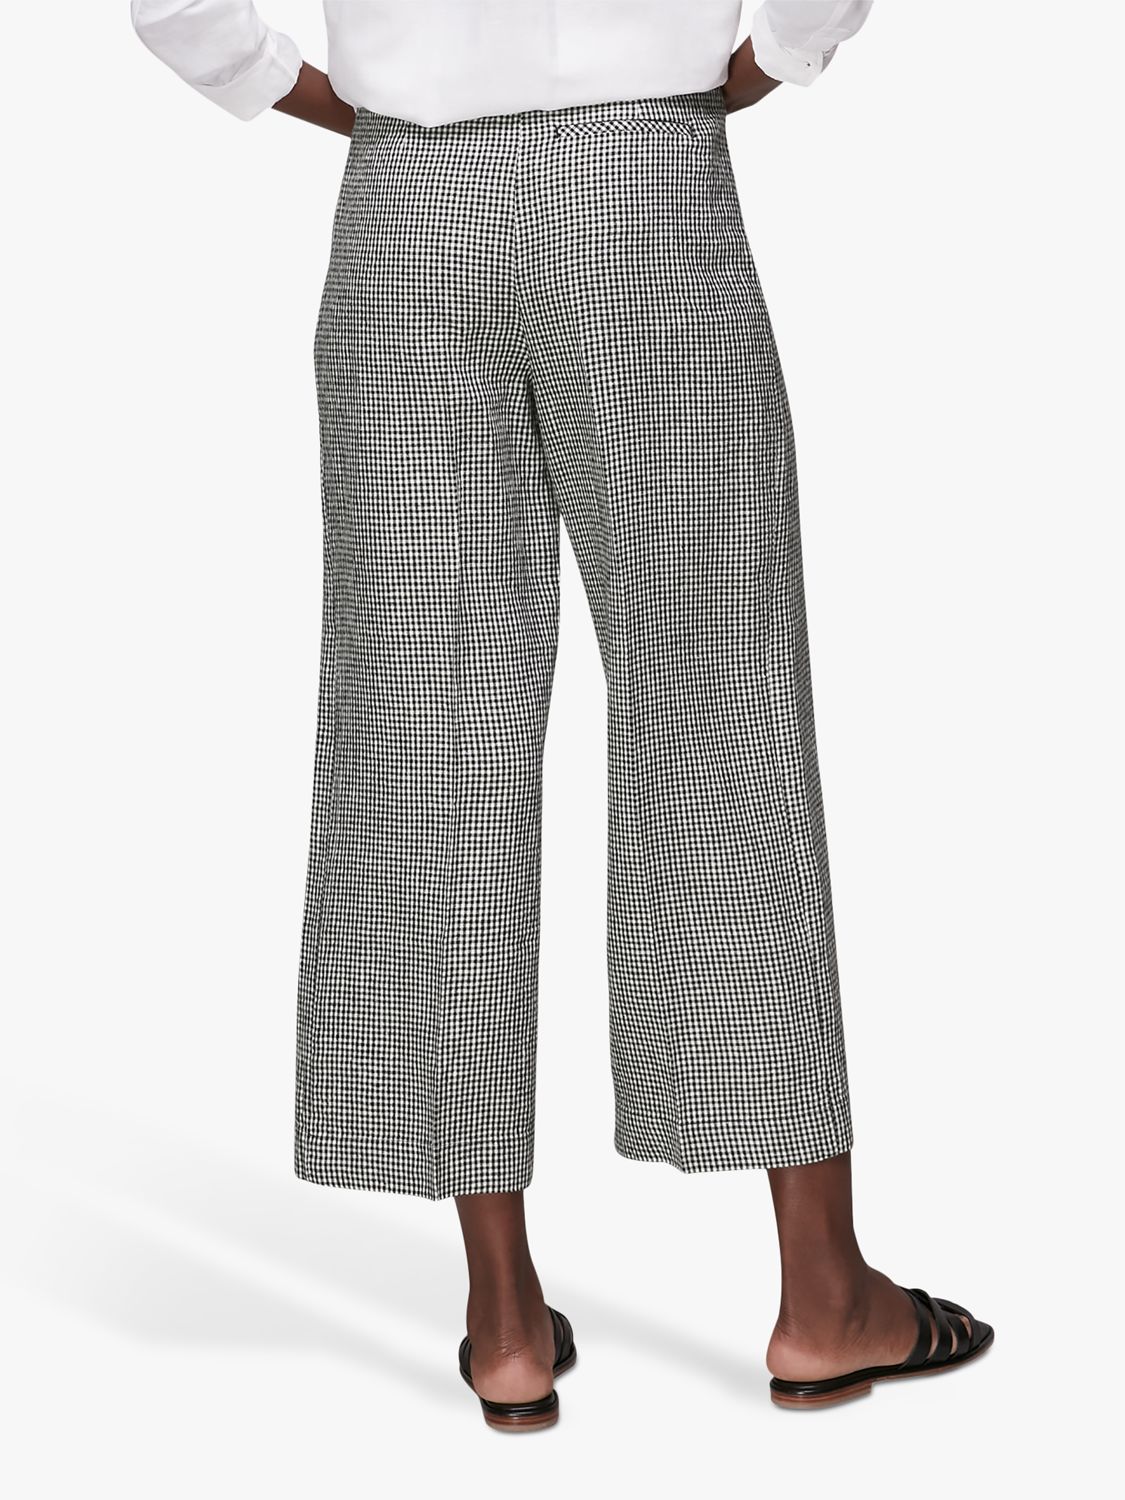 Whistles Checked Cropped Linen Trousers, Navy at John Lewis & Partners